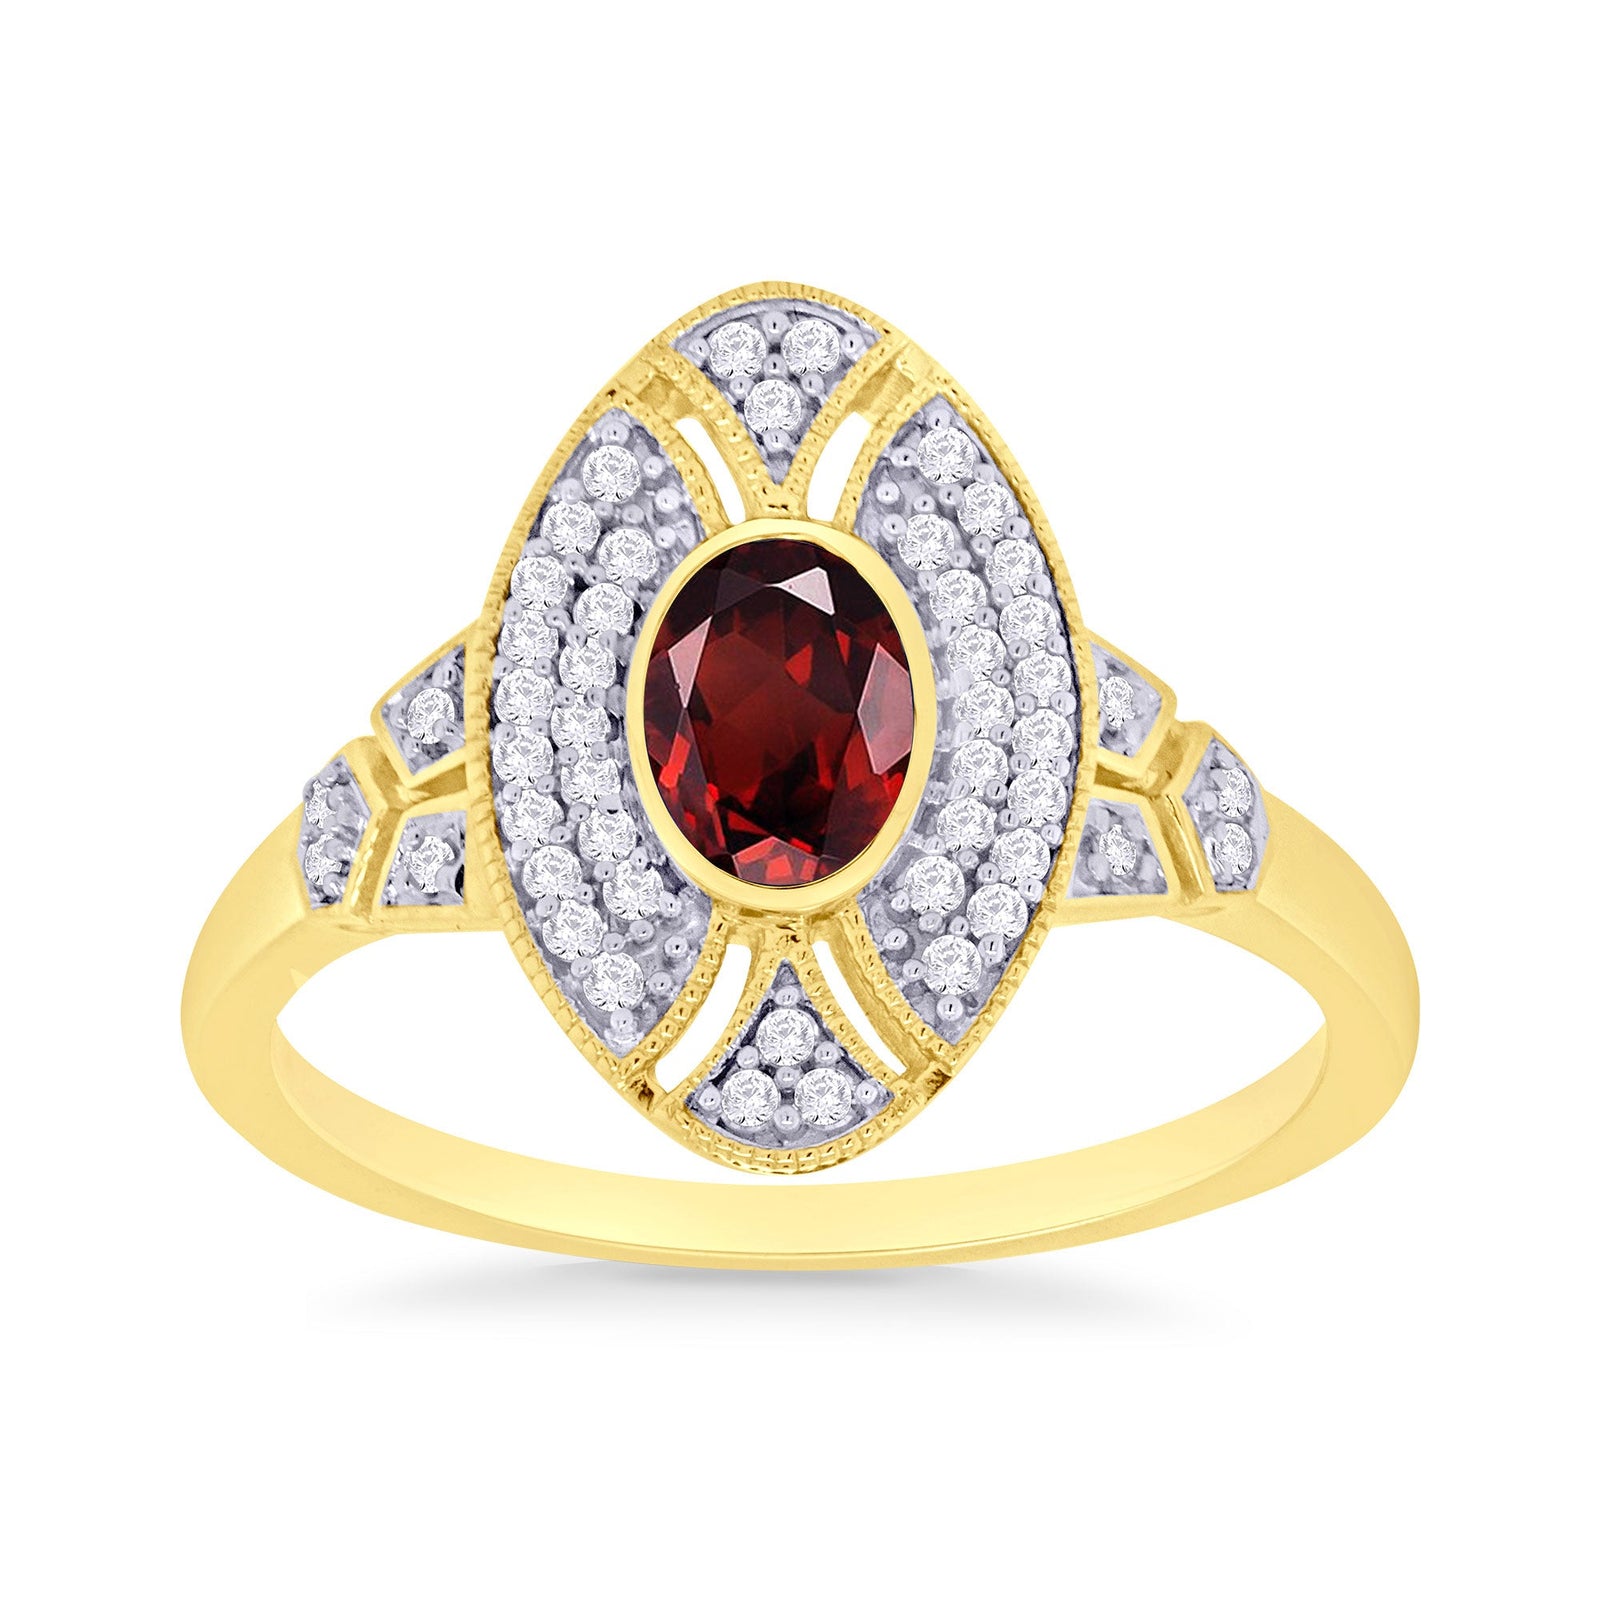 9ct gold 6x4mm oval garnet & antique style diamond cluster ring 0.18ct